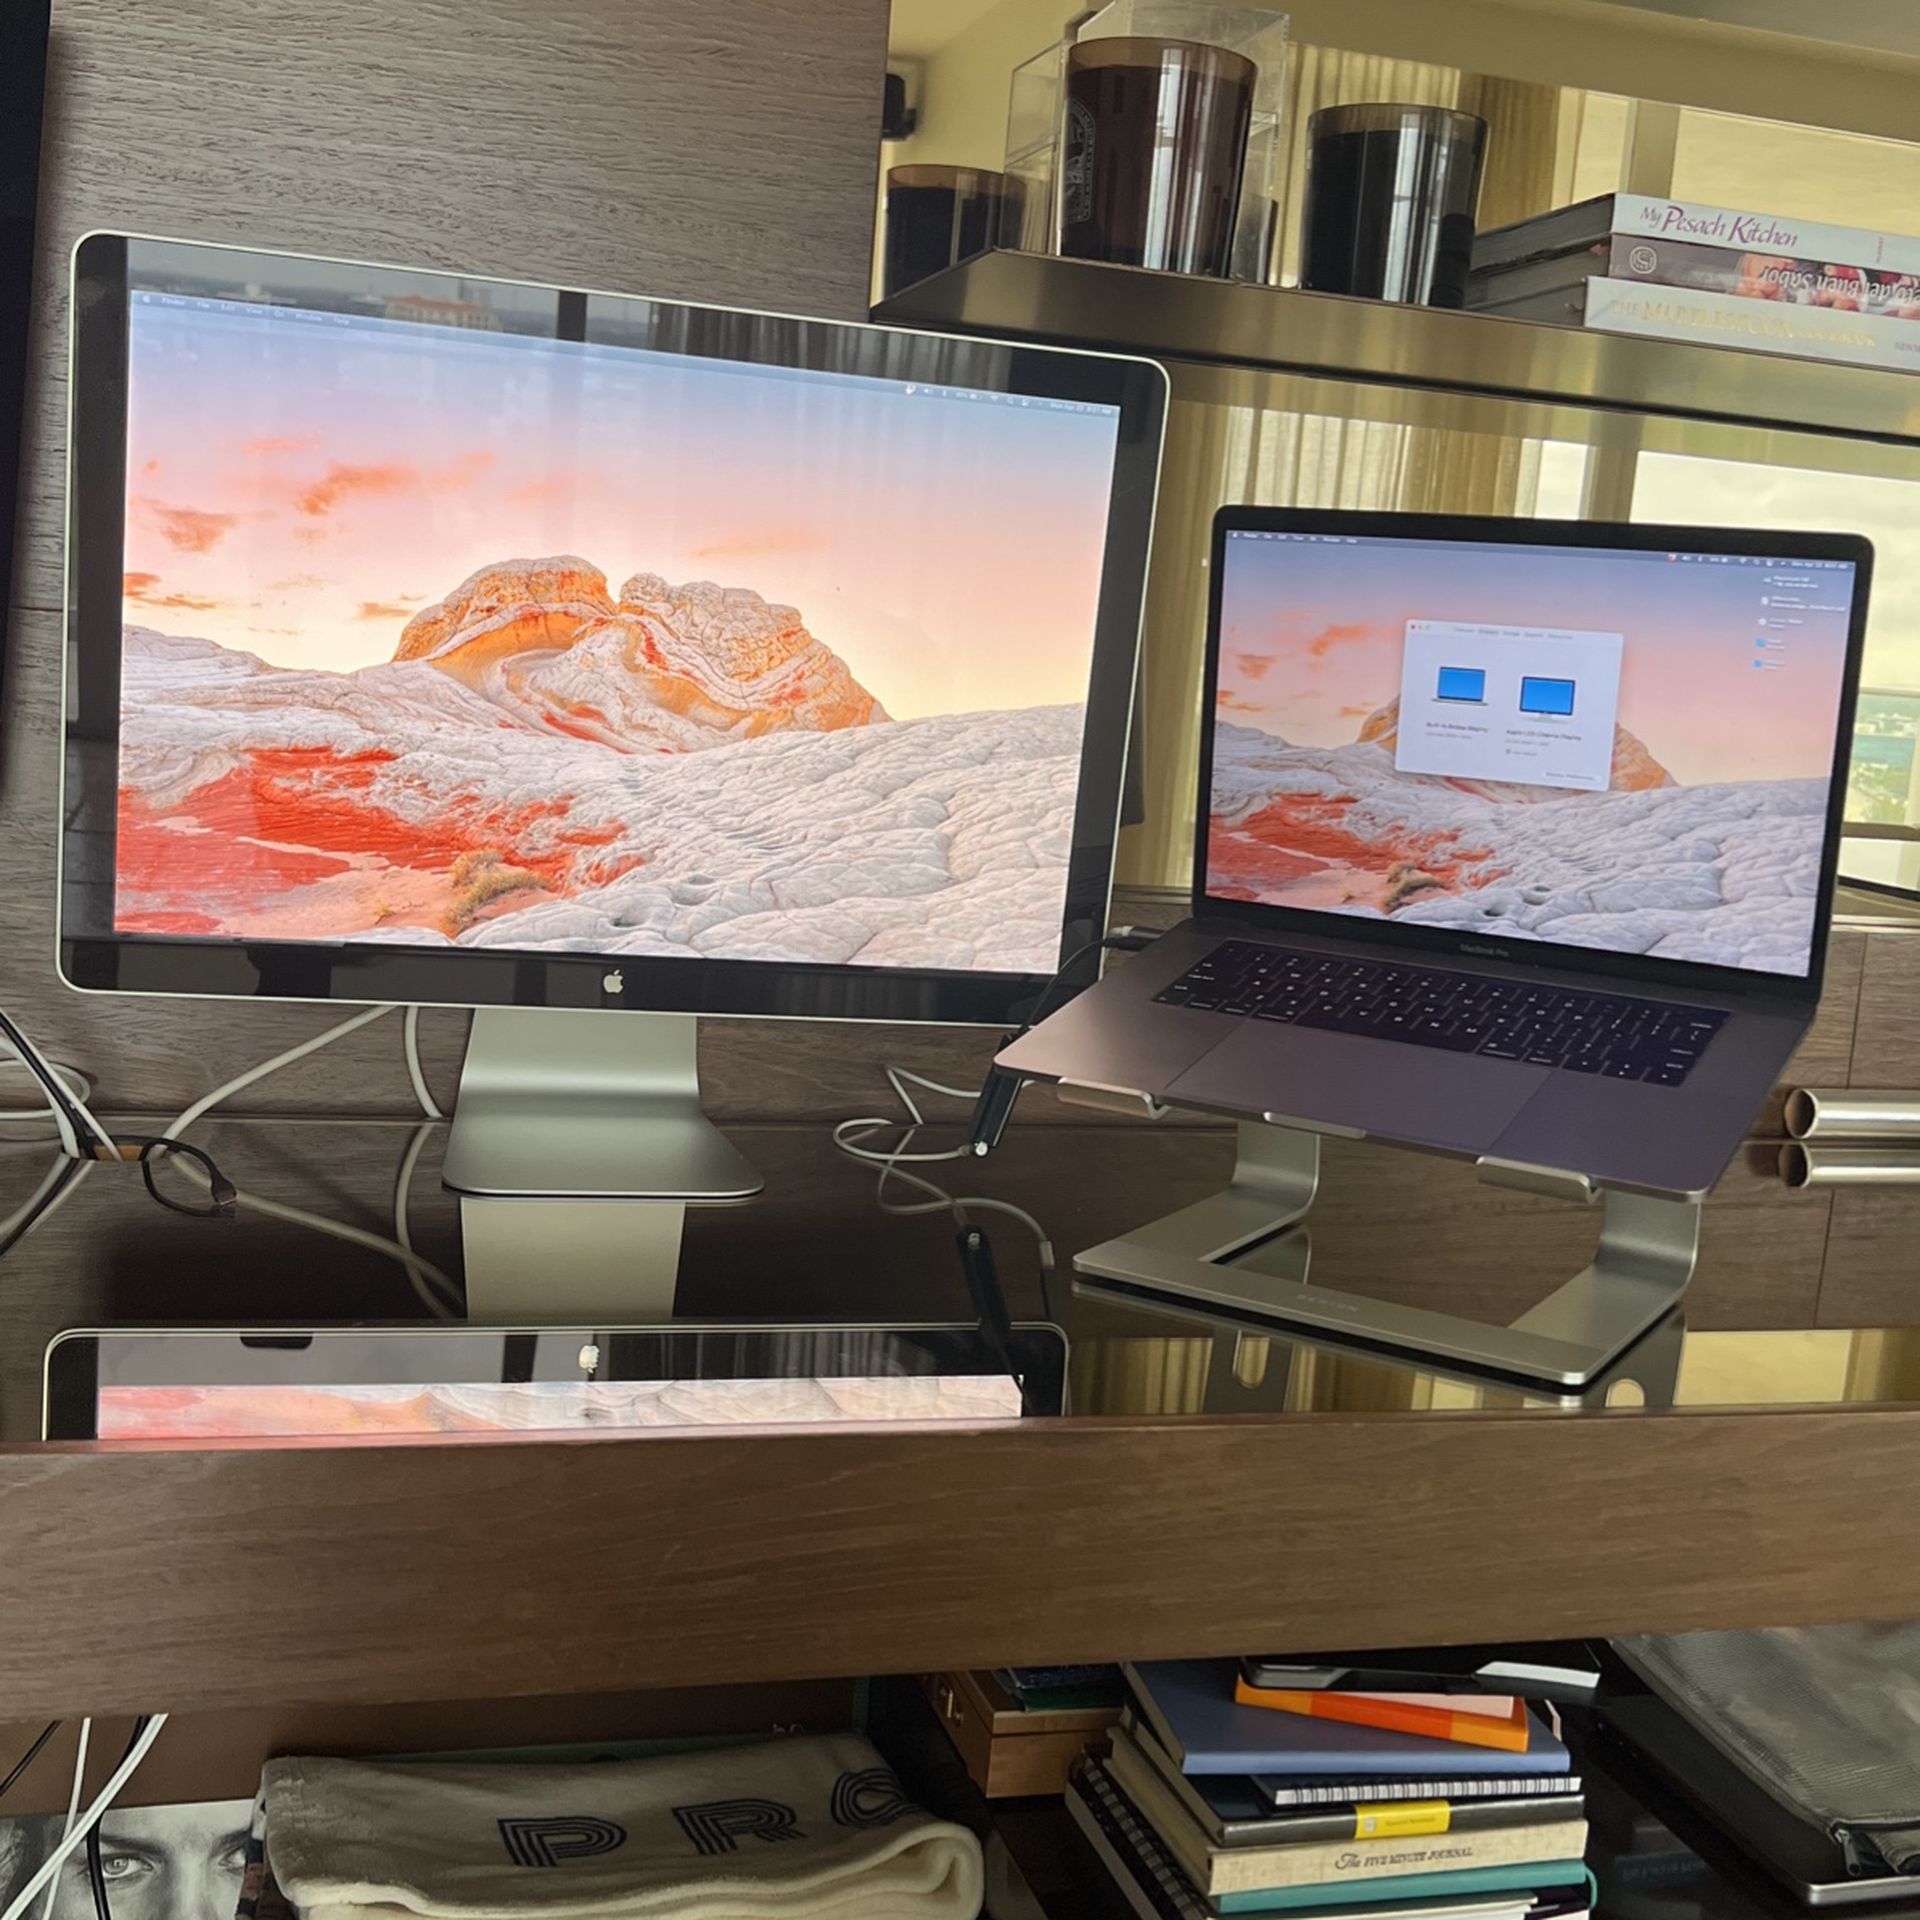 Macbook pro 15” With Monitor Set Up